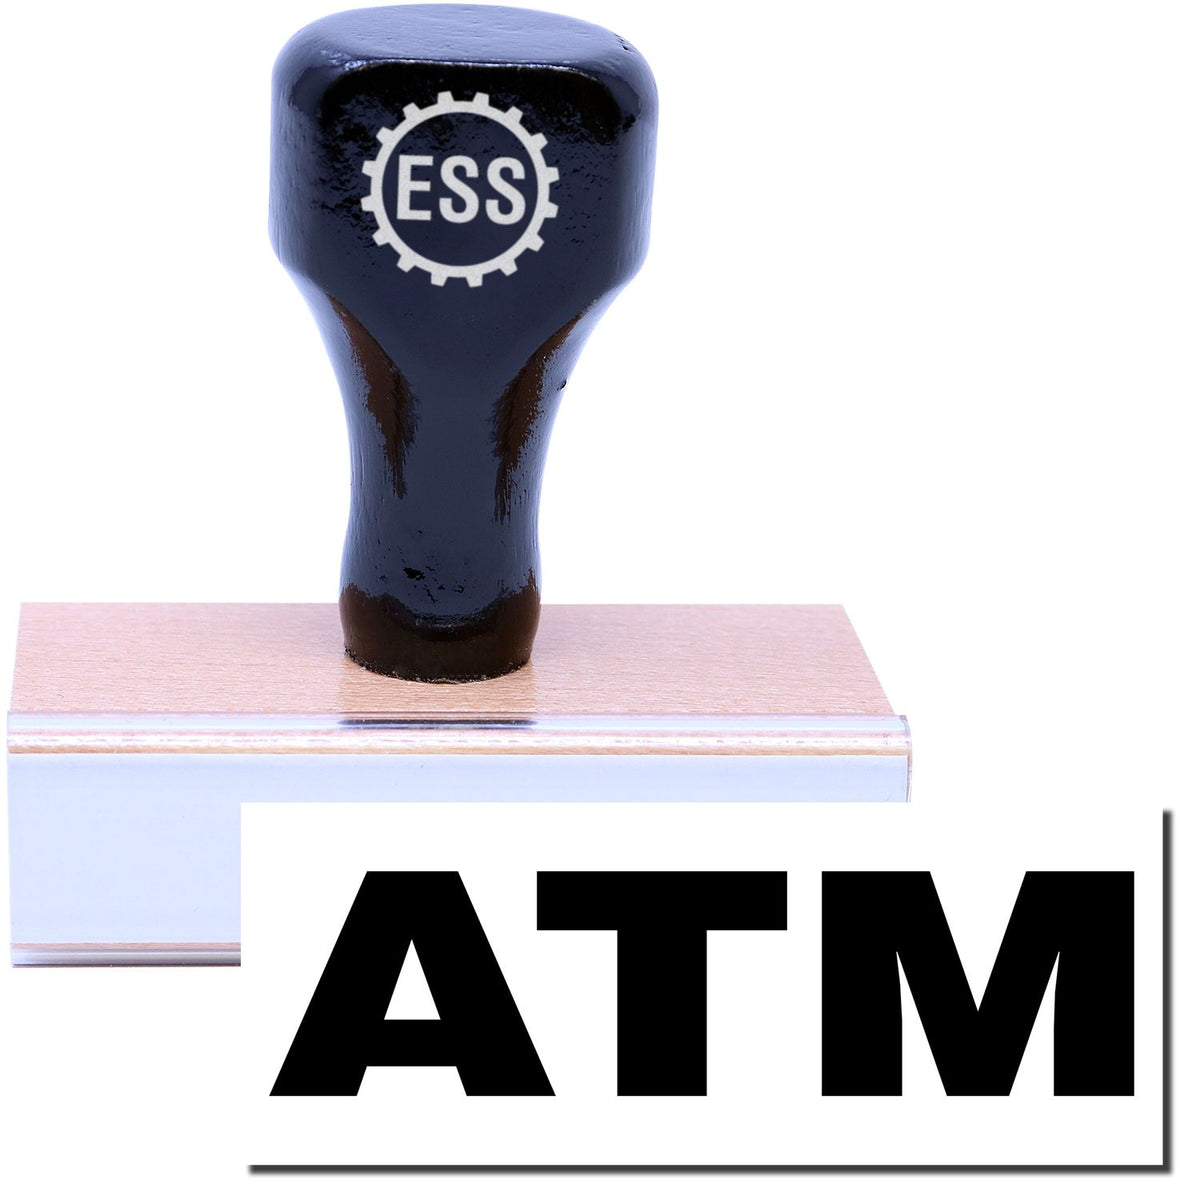 A stock office rubber stamp with a stamped image showing how the text &quot;ATM&quot; in a large font is displayed after stamping.